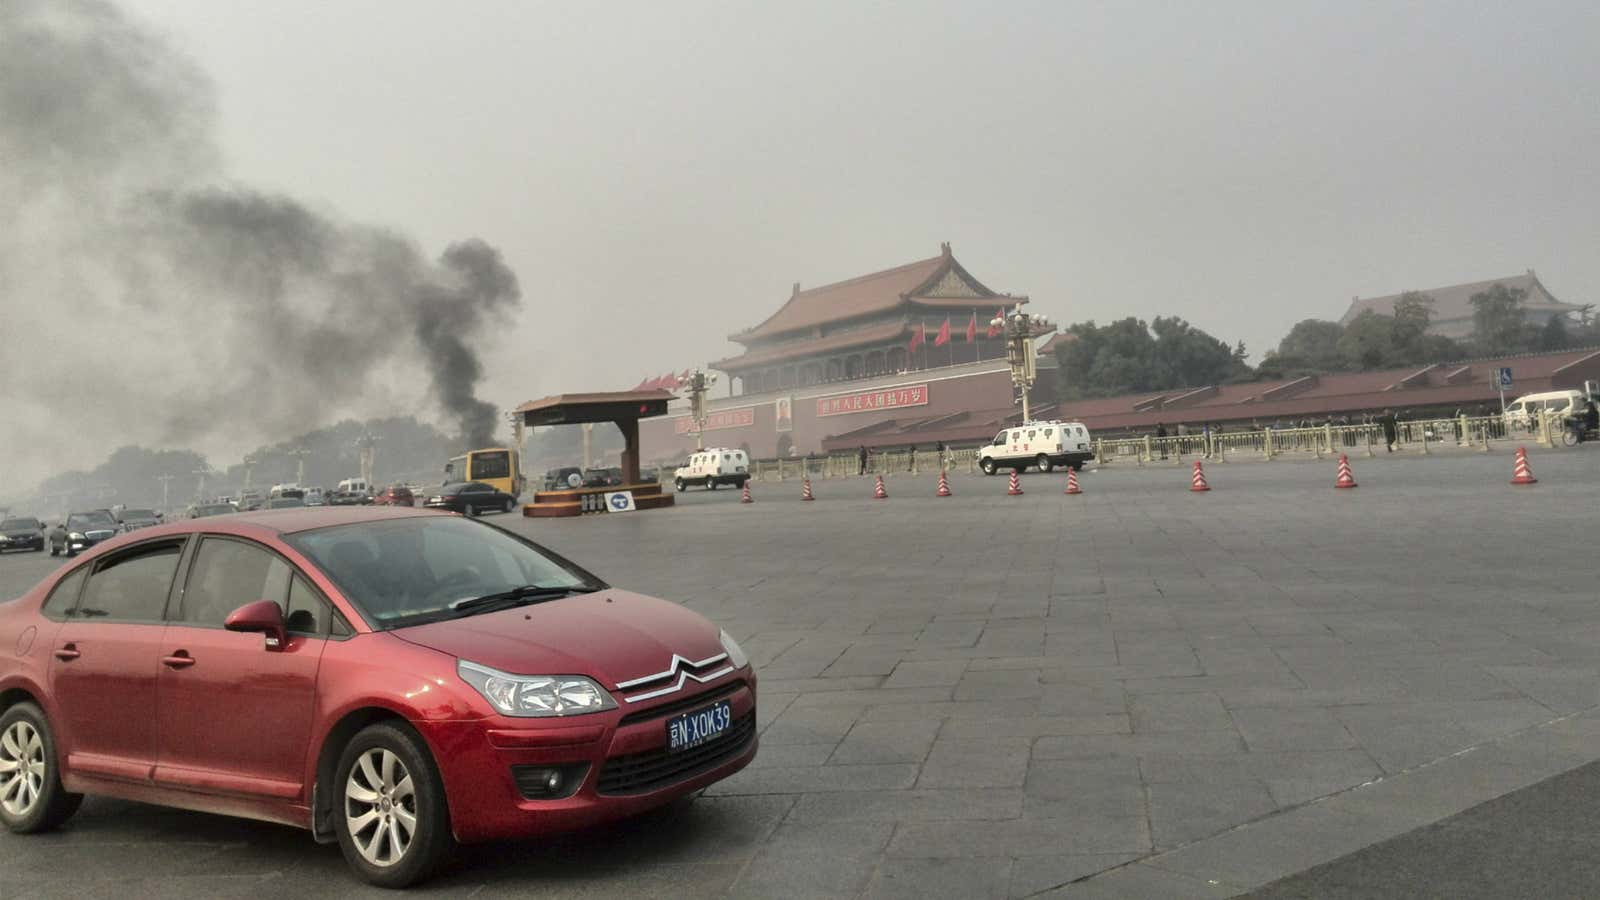 Smoke rises in Tiananmen Square after a vehicle explosion that killed five.